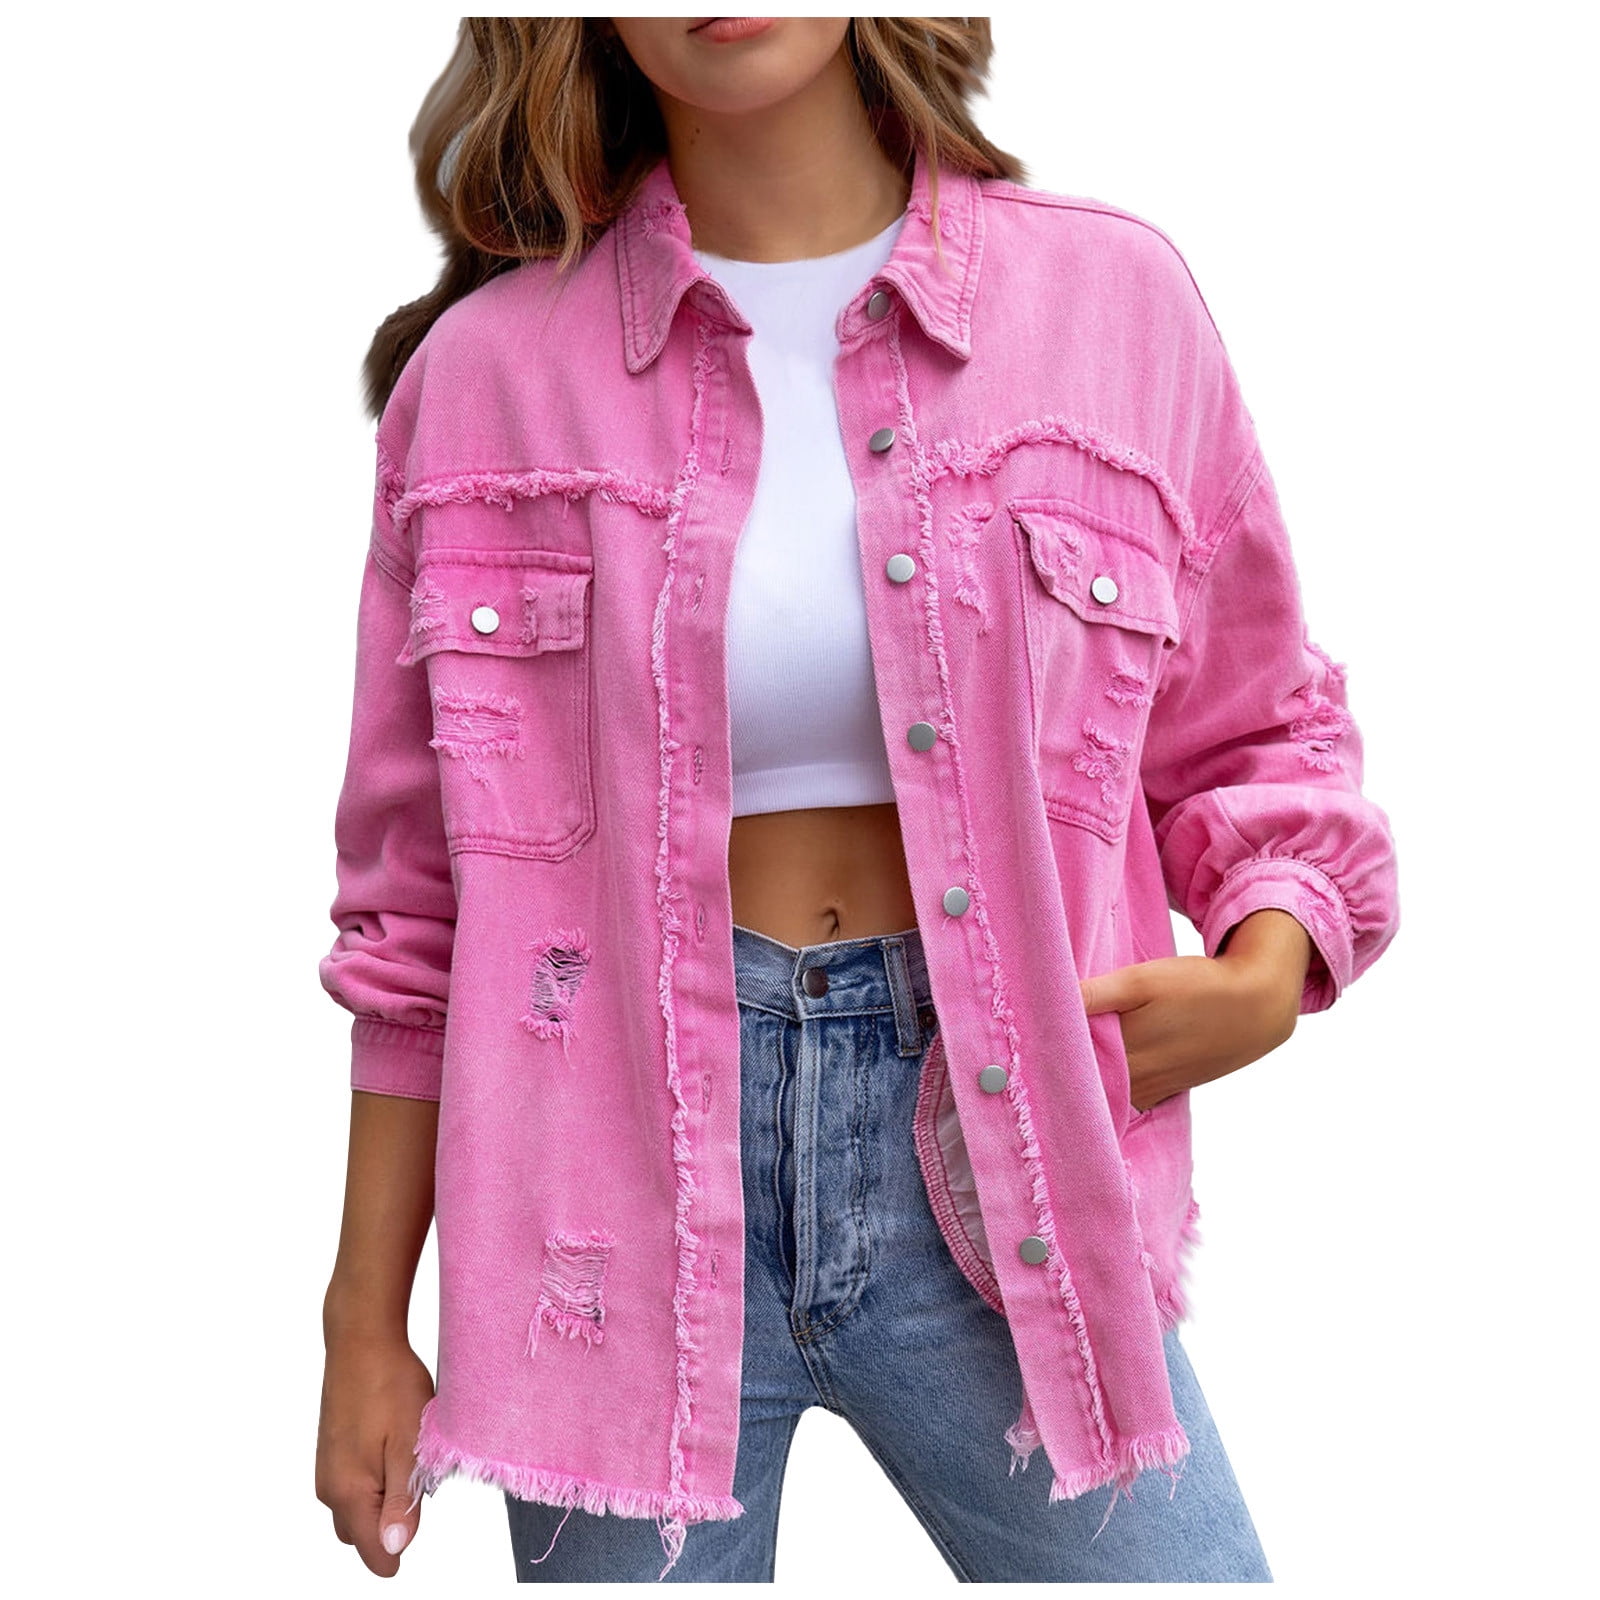 YYDGH Women's Oversized Frayed Lightweight Denim Jacket Button Down Ripped  Distressed Jean Shacket Pink XL 